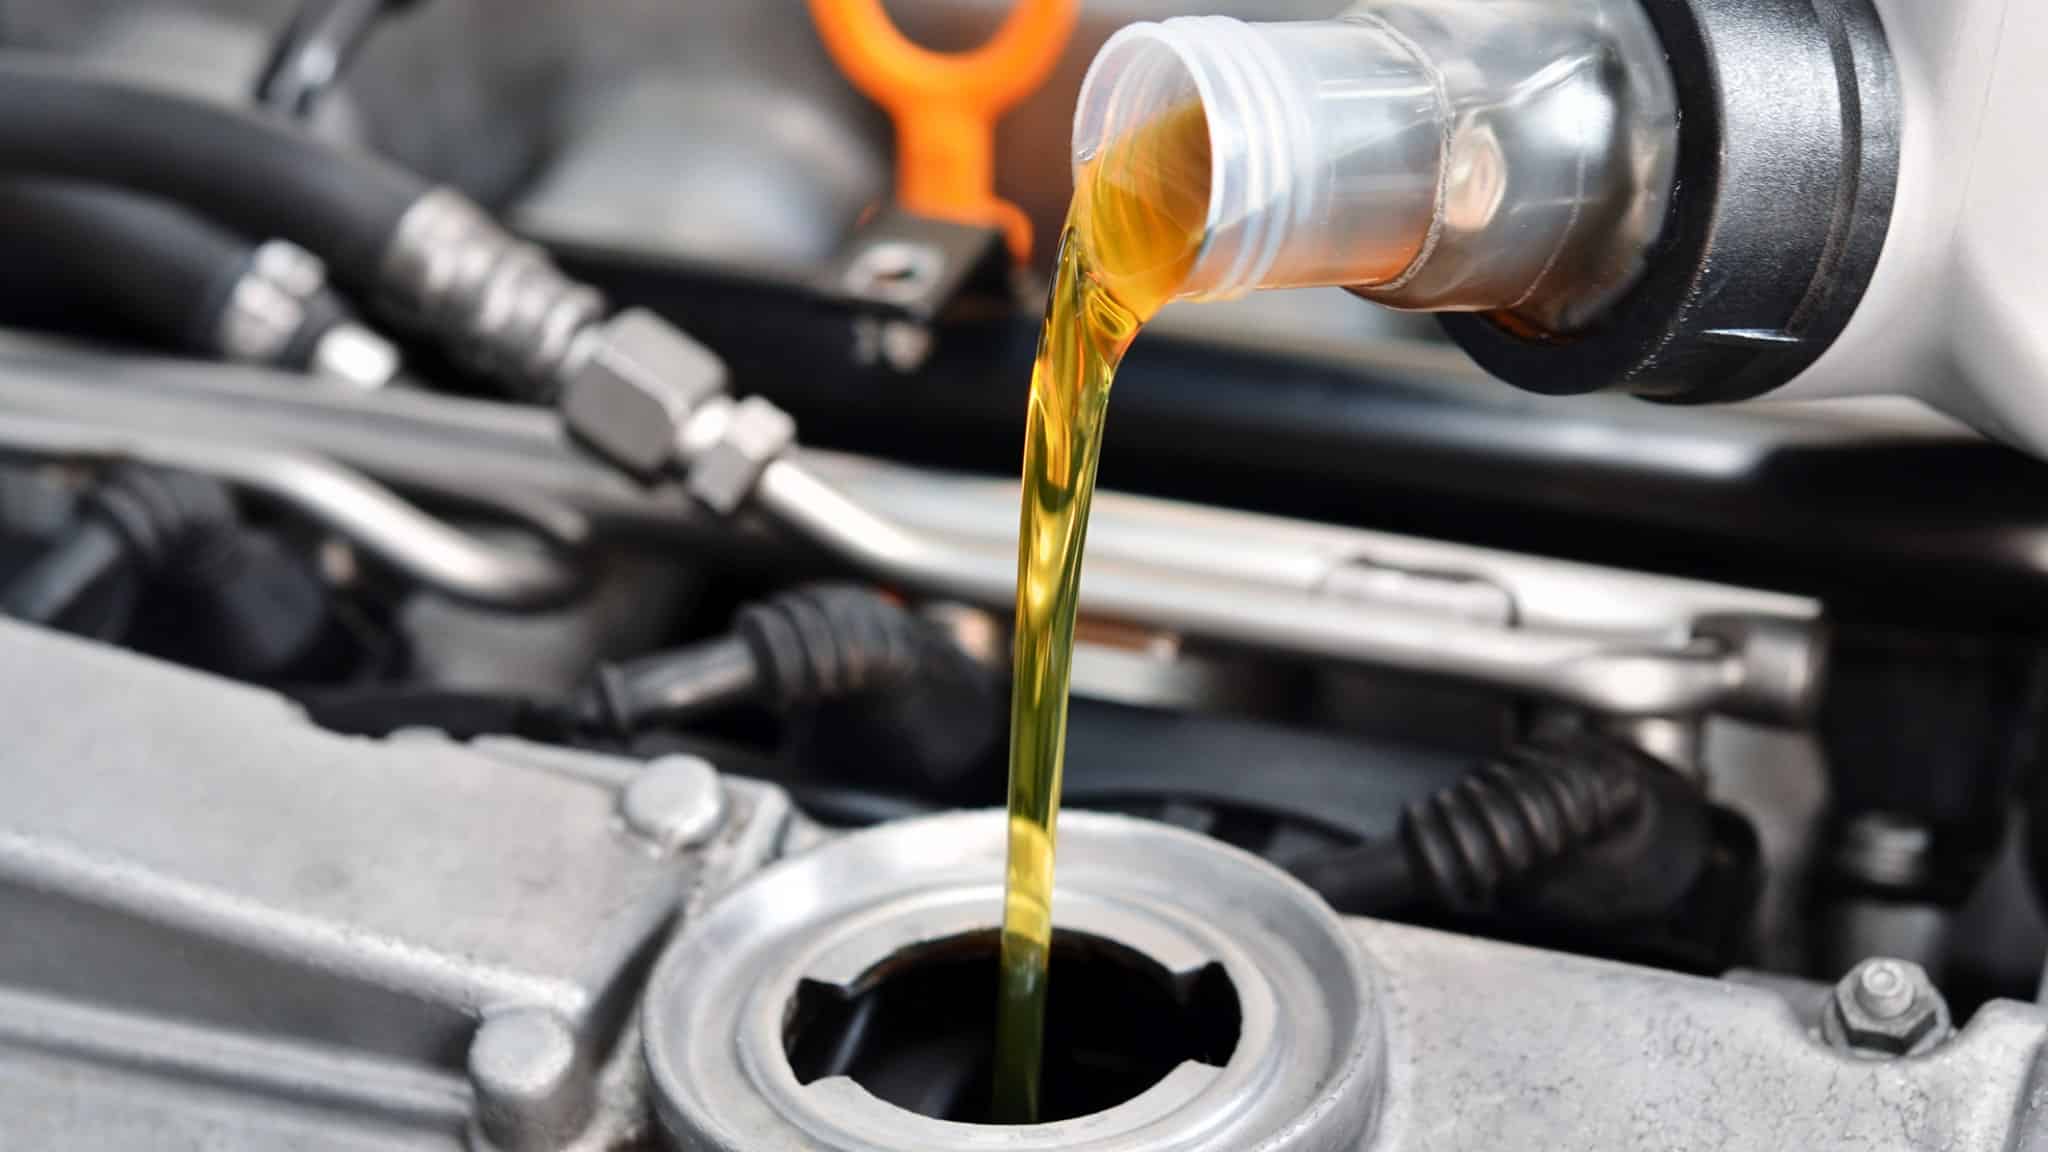 Top 4 FAQs about Auto Maintenance